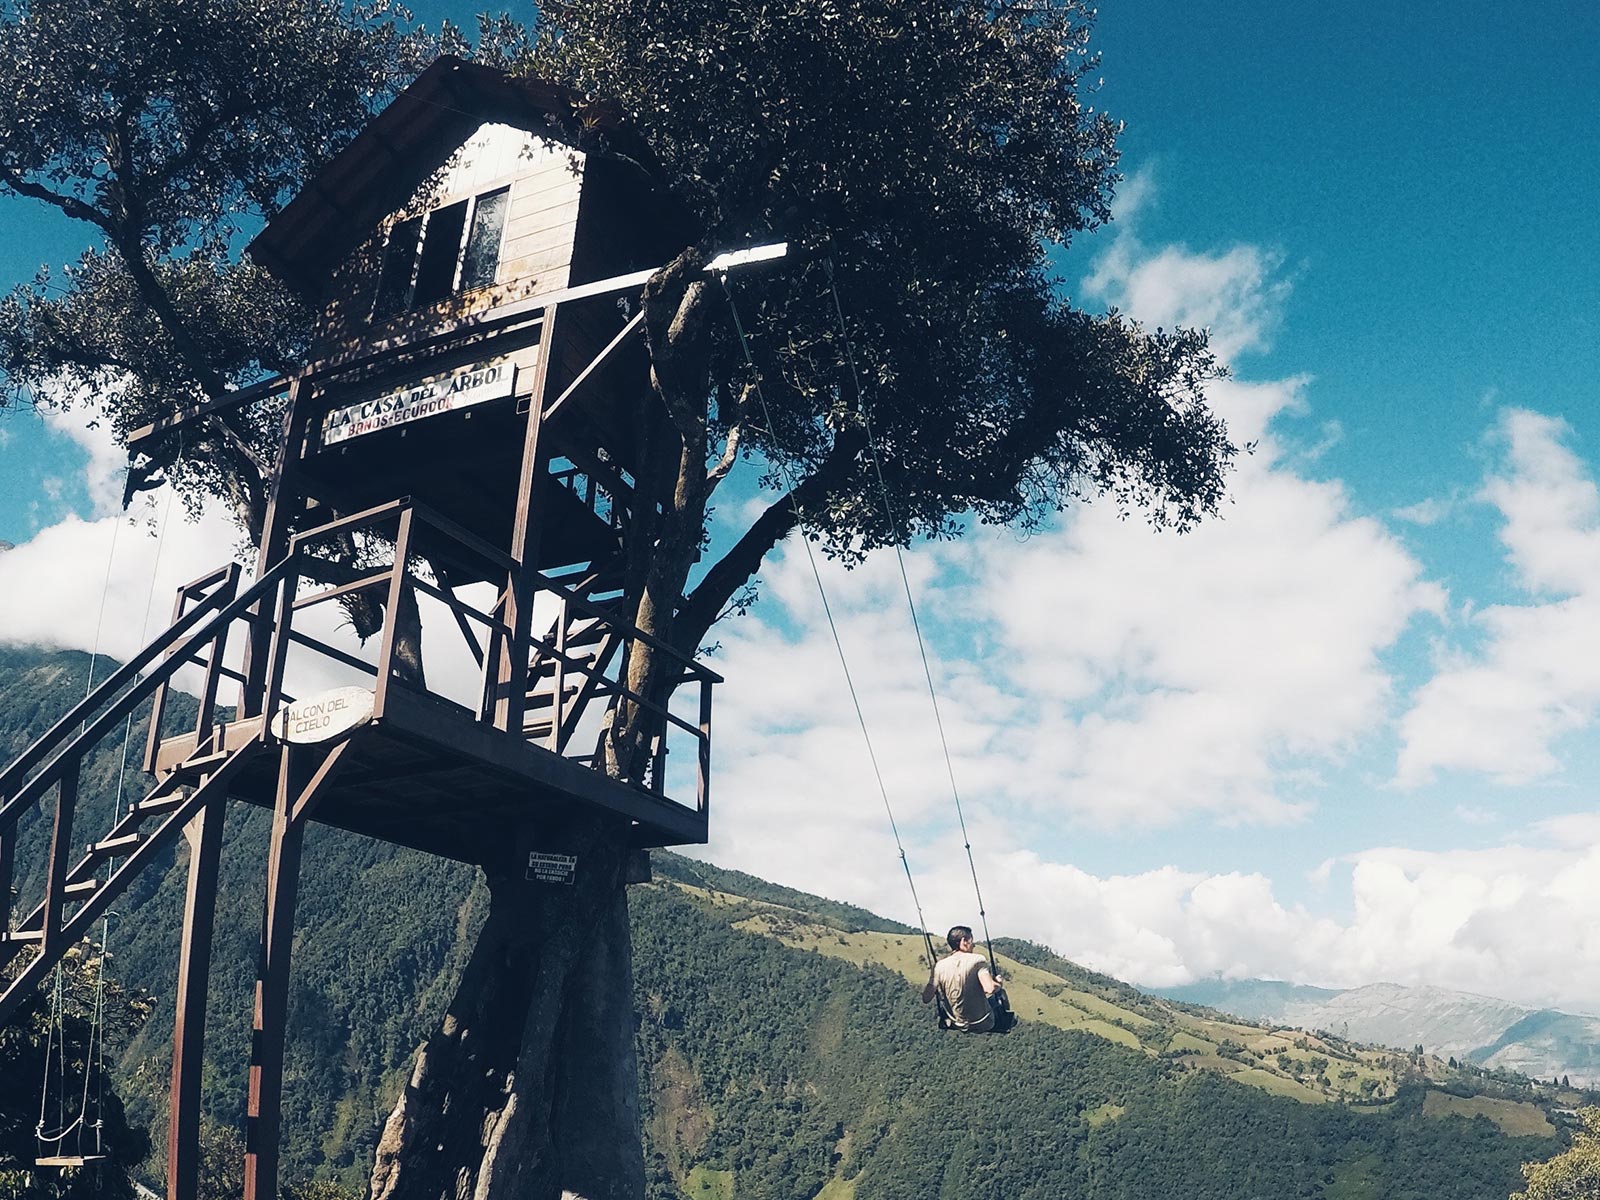 David Simpson riding the swing at the end of the world in Banôs, Ecuador. A Swing, The Equator & needing the Banôs in Banôs